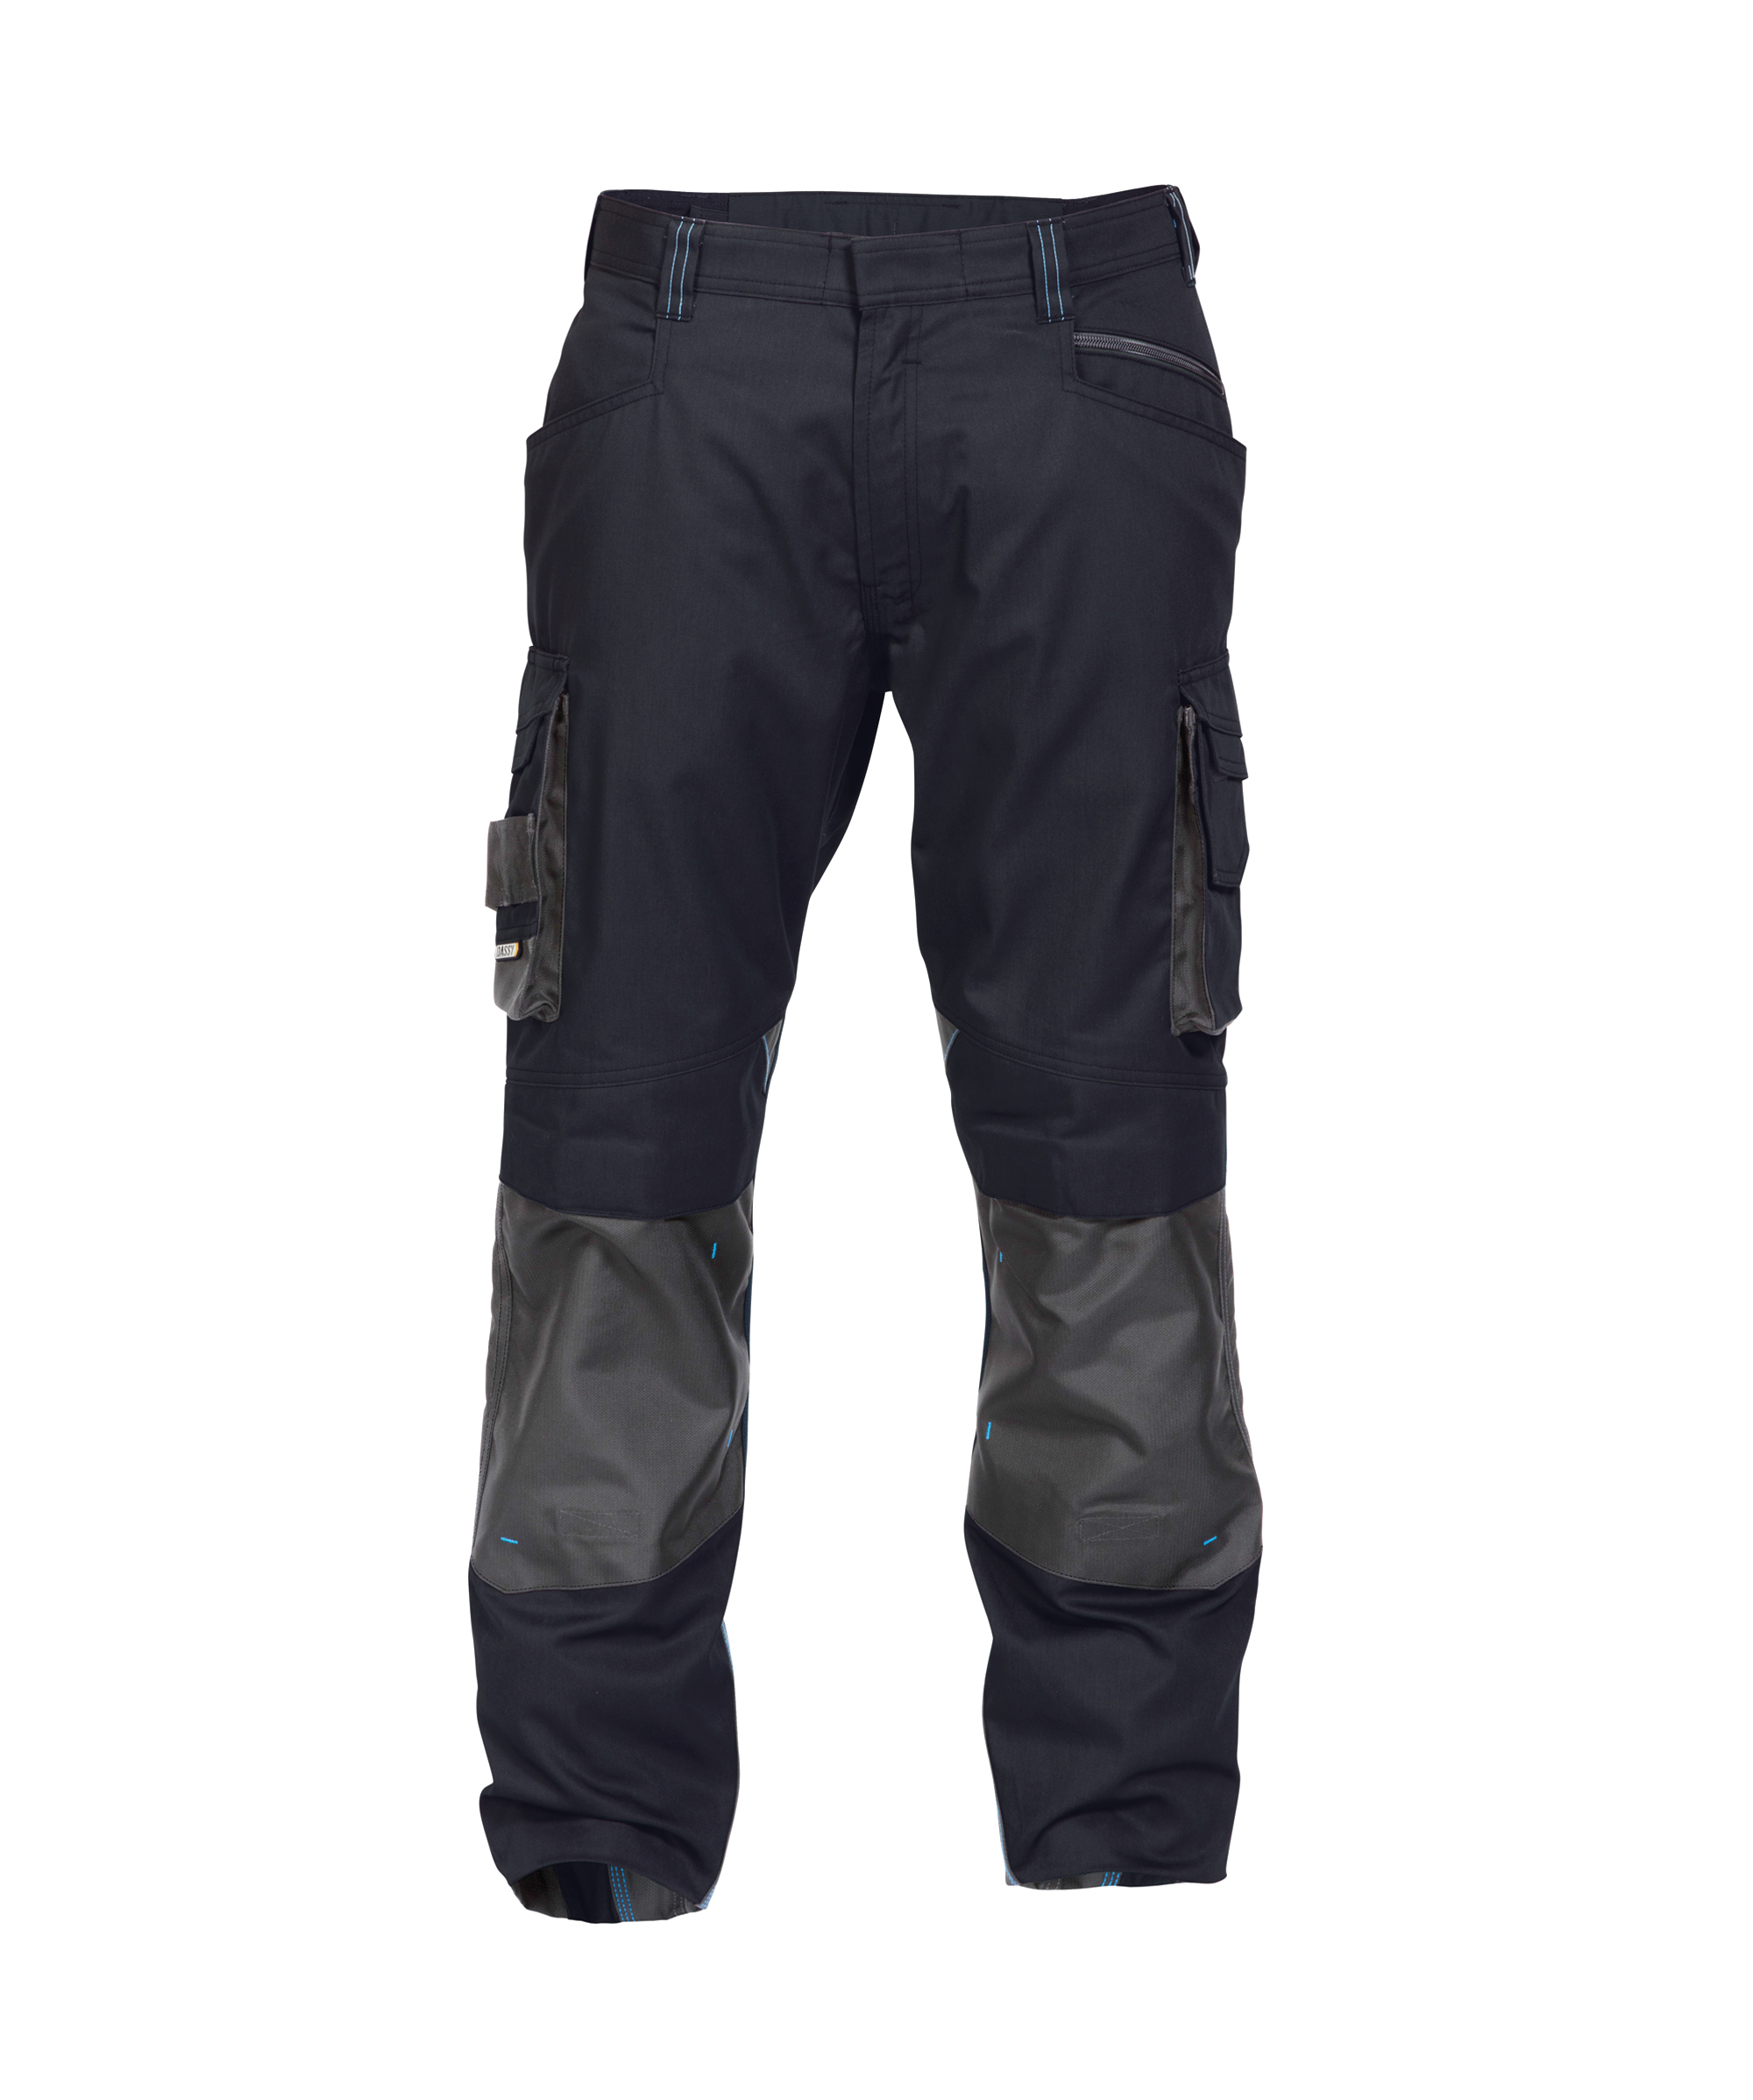 nova_two-tone-work-trousers-with-knee-pockets_midnight-blue-anthracite-grey_front.jpg